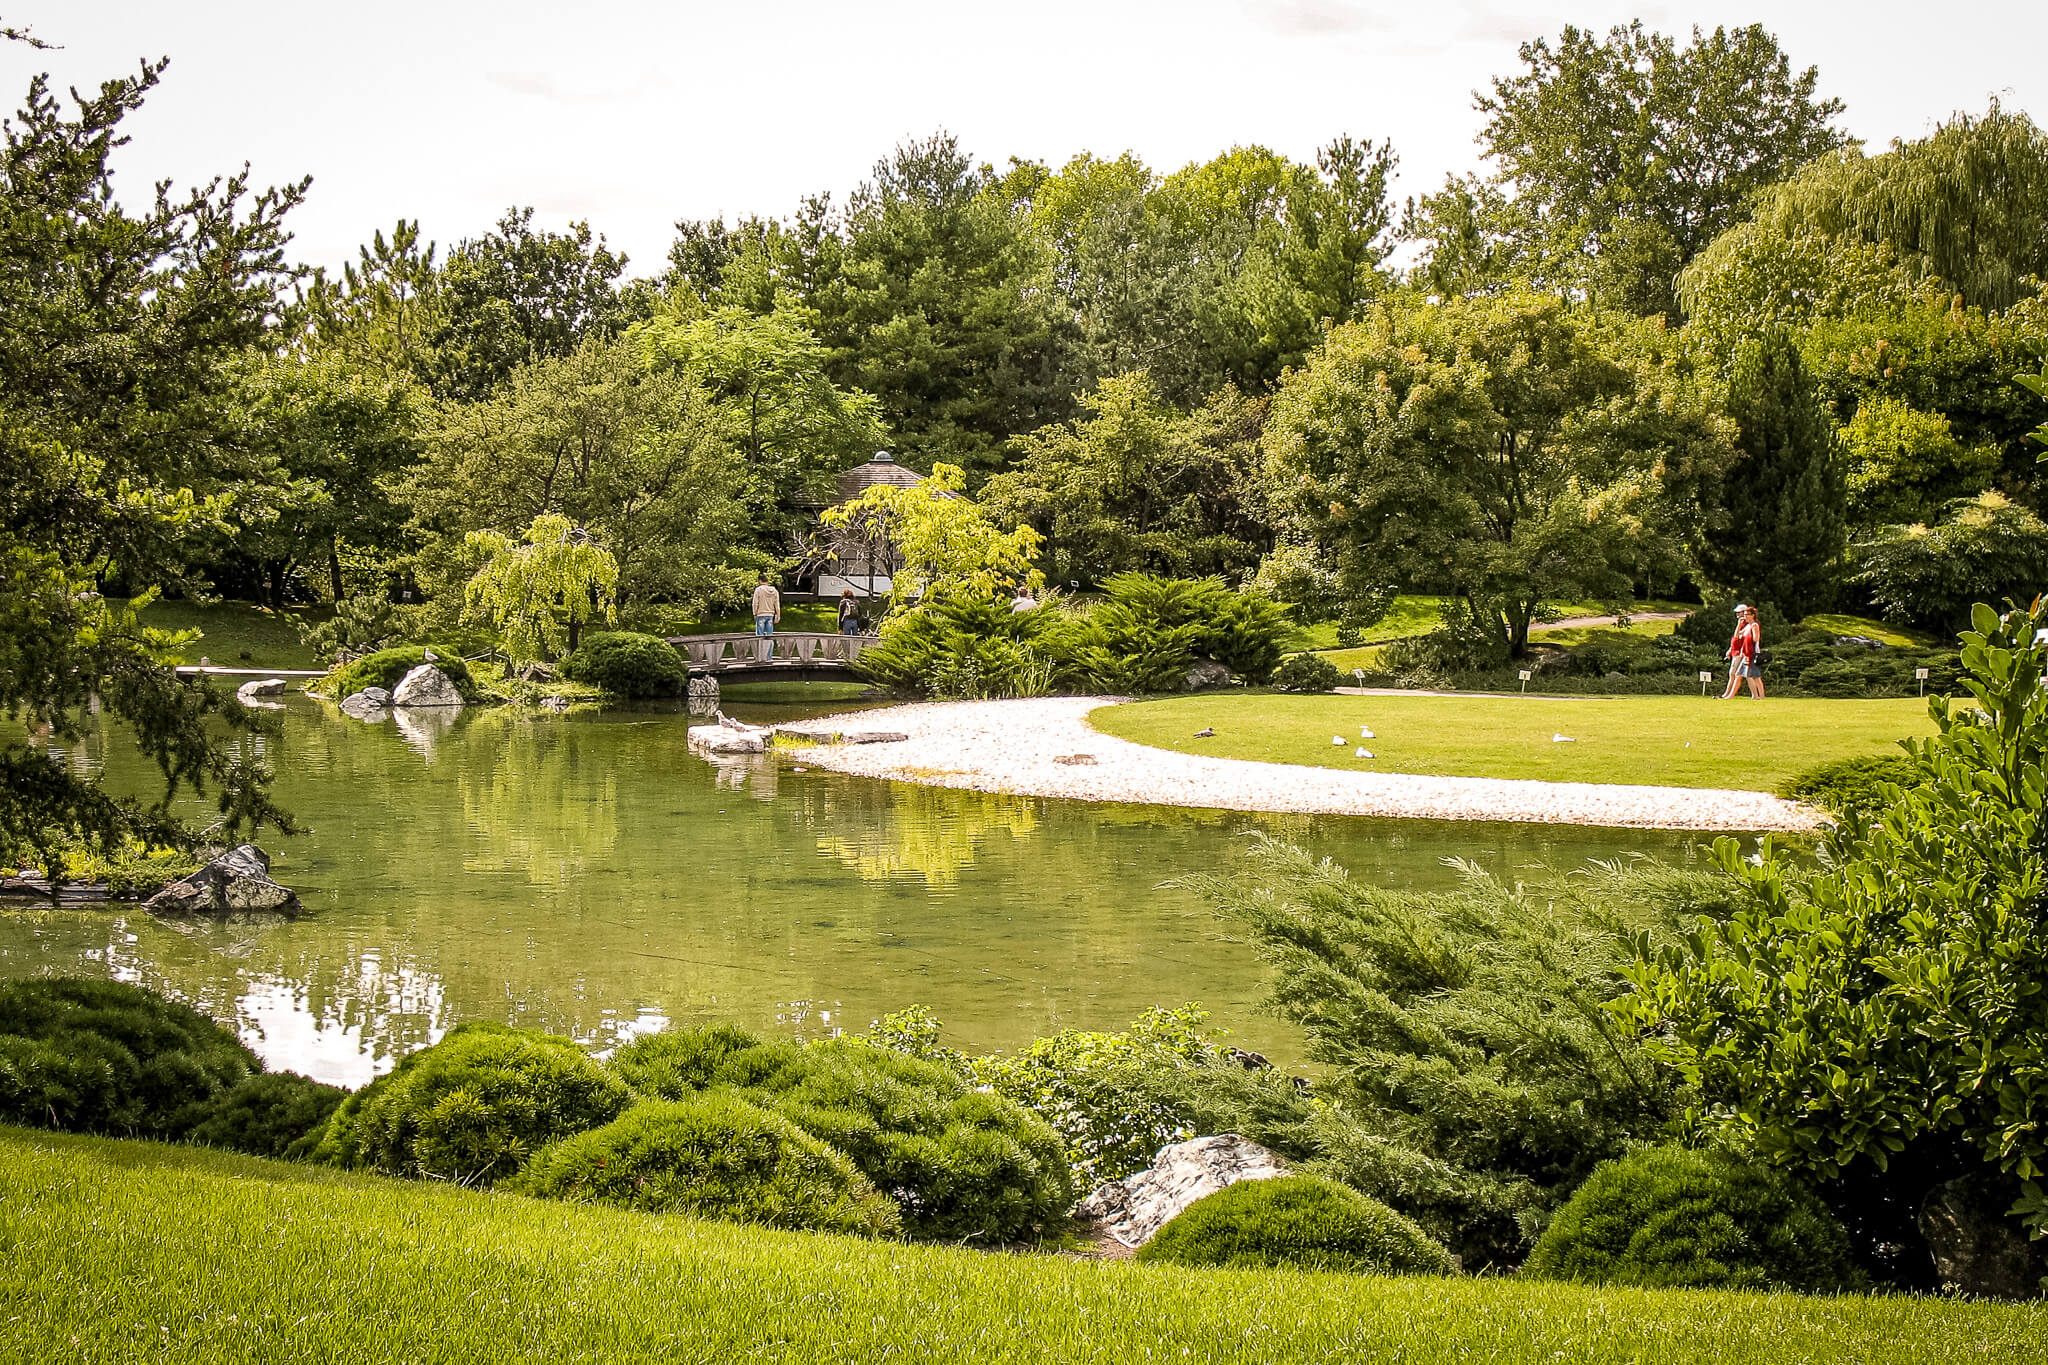 The Japanese garden at the Montreal Botanical Gardens